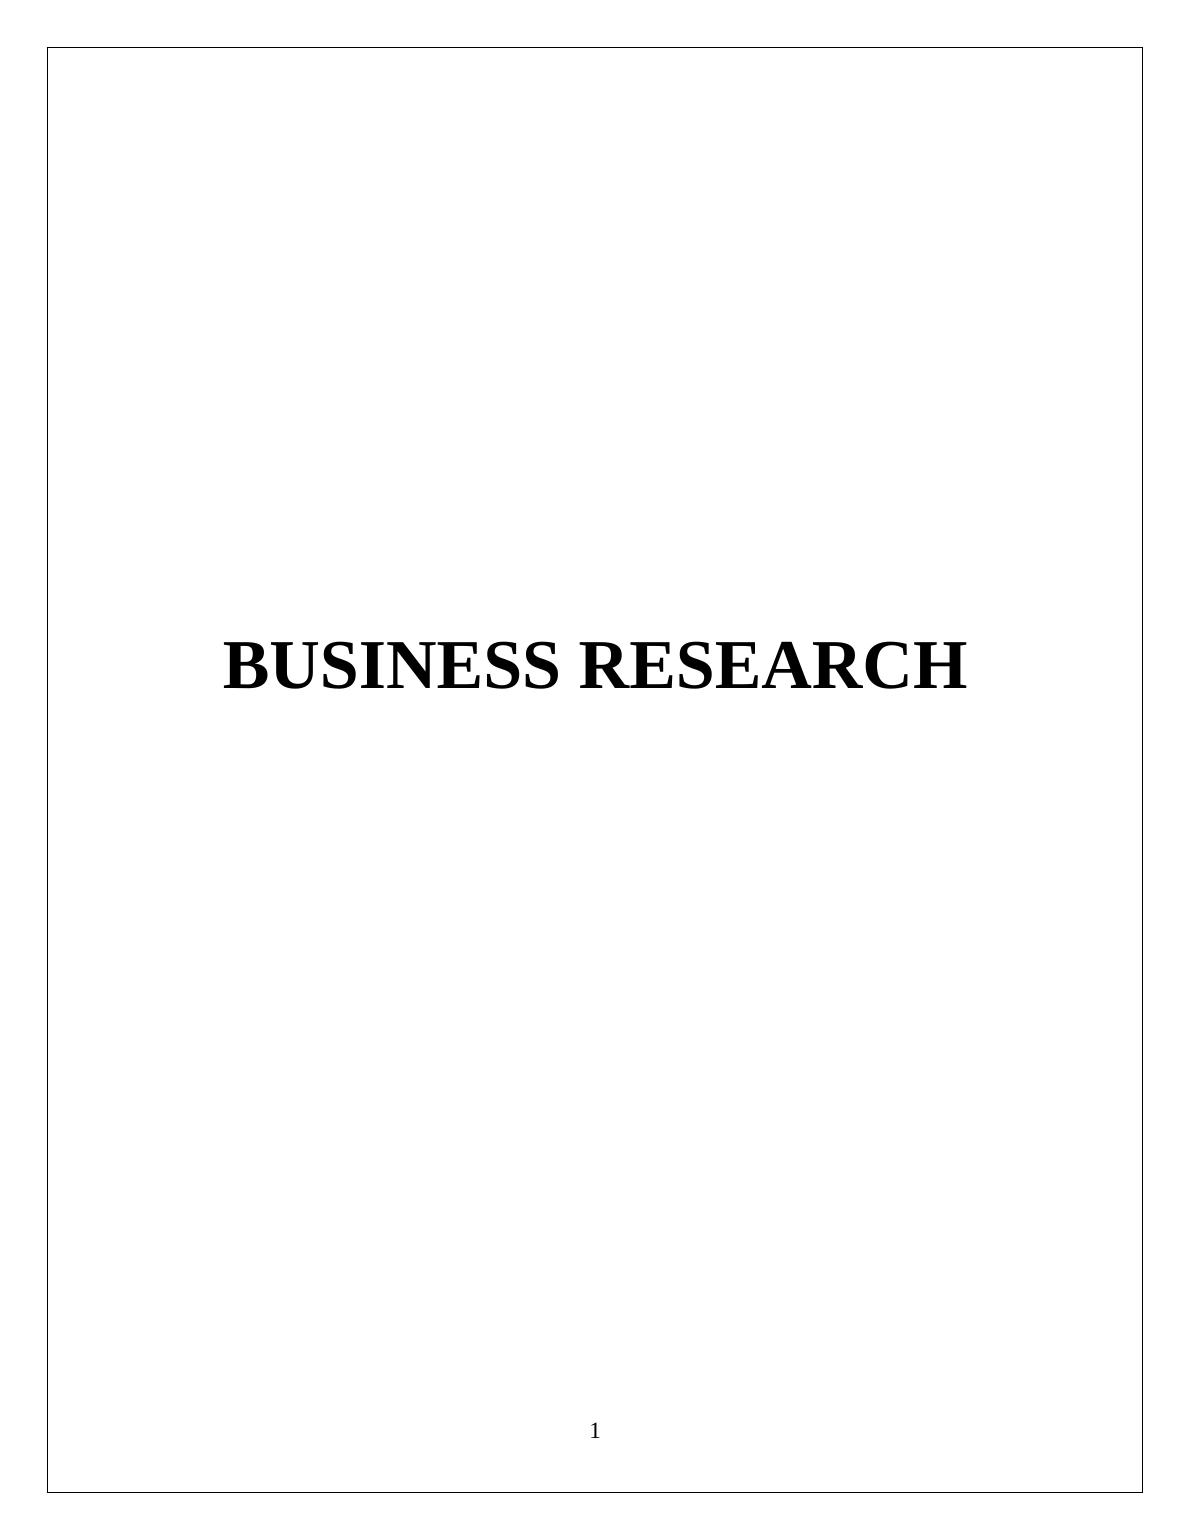 Business Research Learning Process Assignment_1